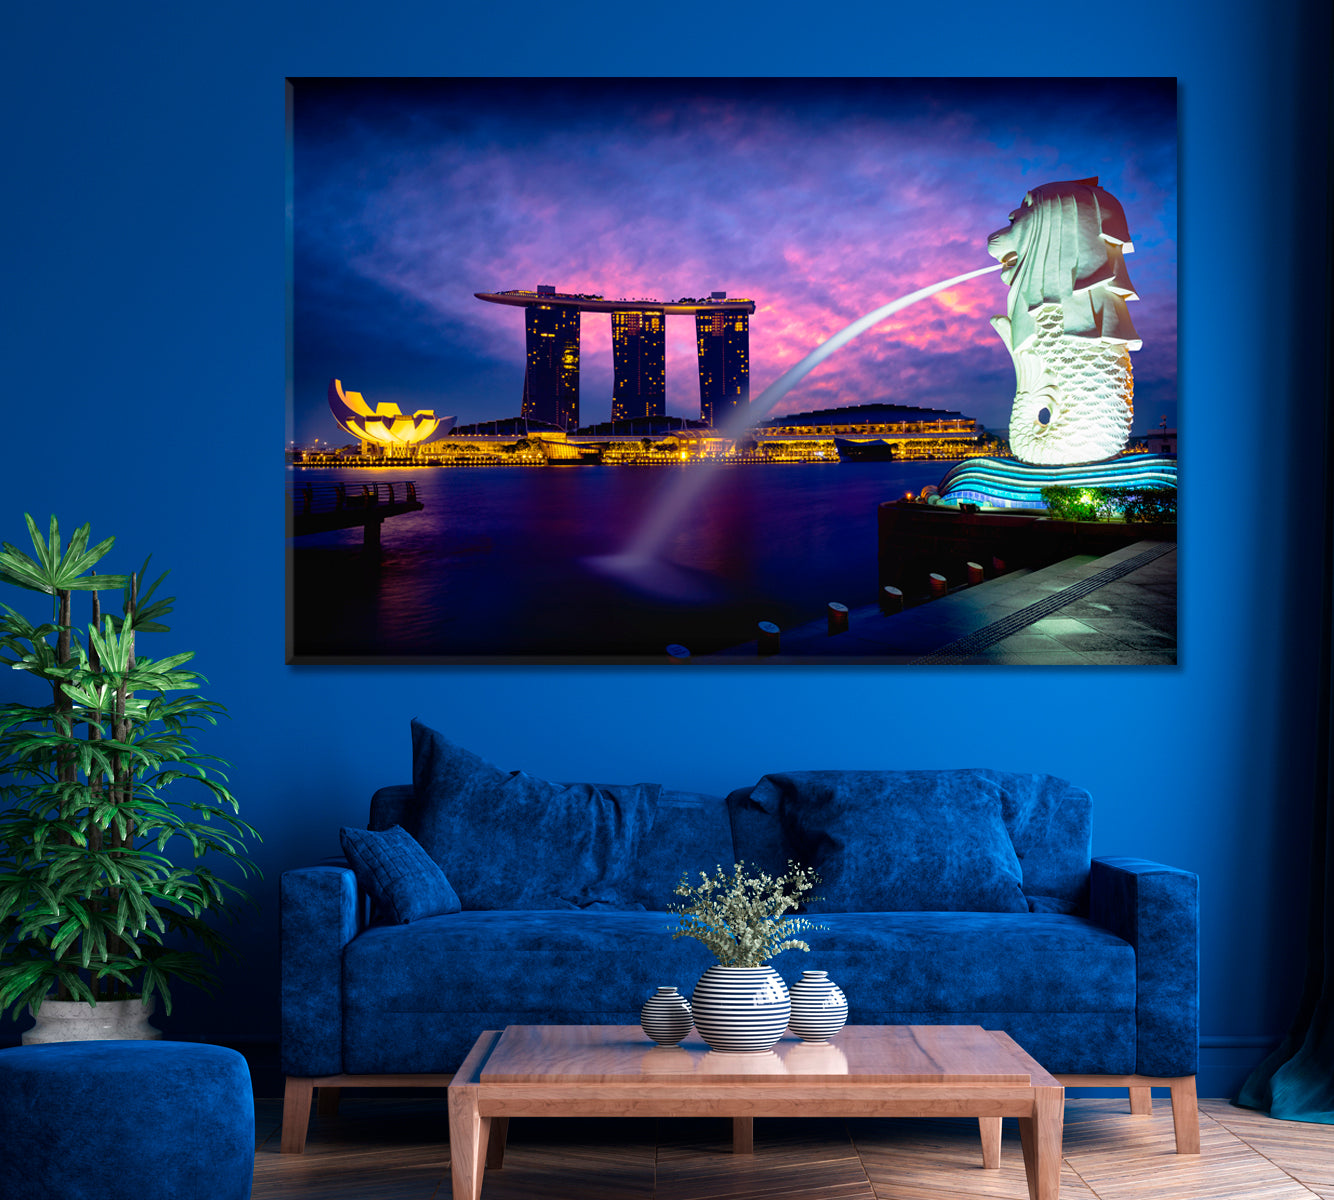 Merlion Fountain and Marina Bay Singapore Canvas Print ArtLexy 1 Panel 24"x16" inches 